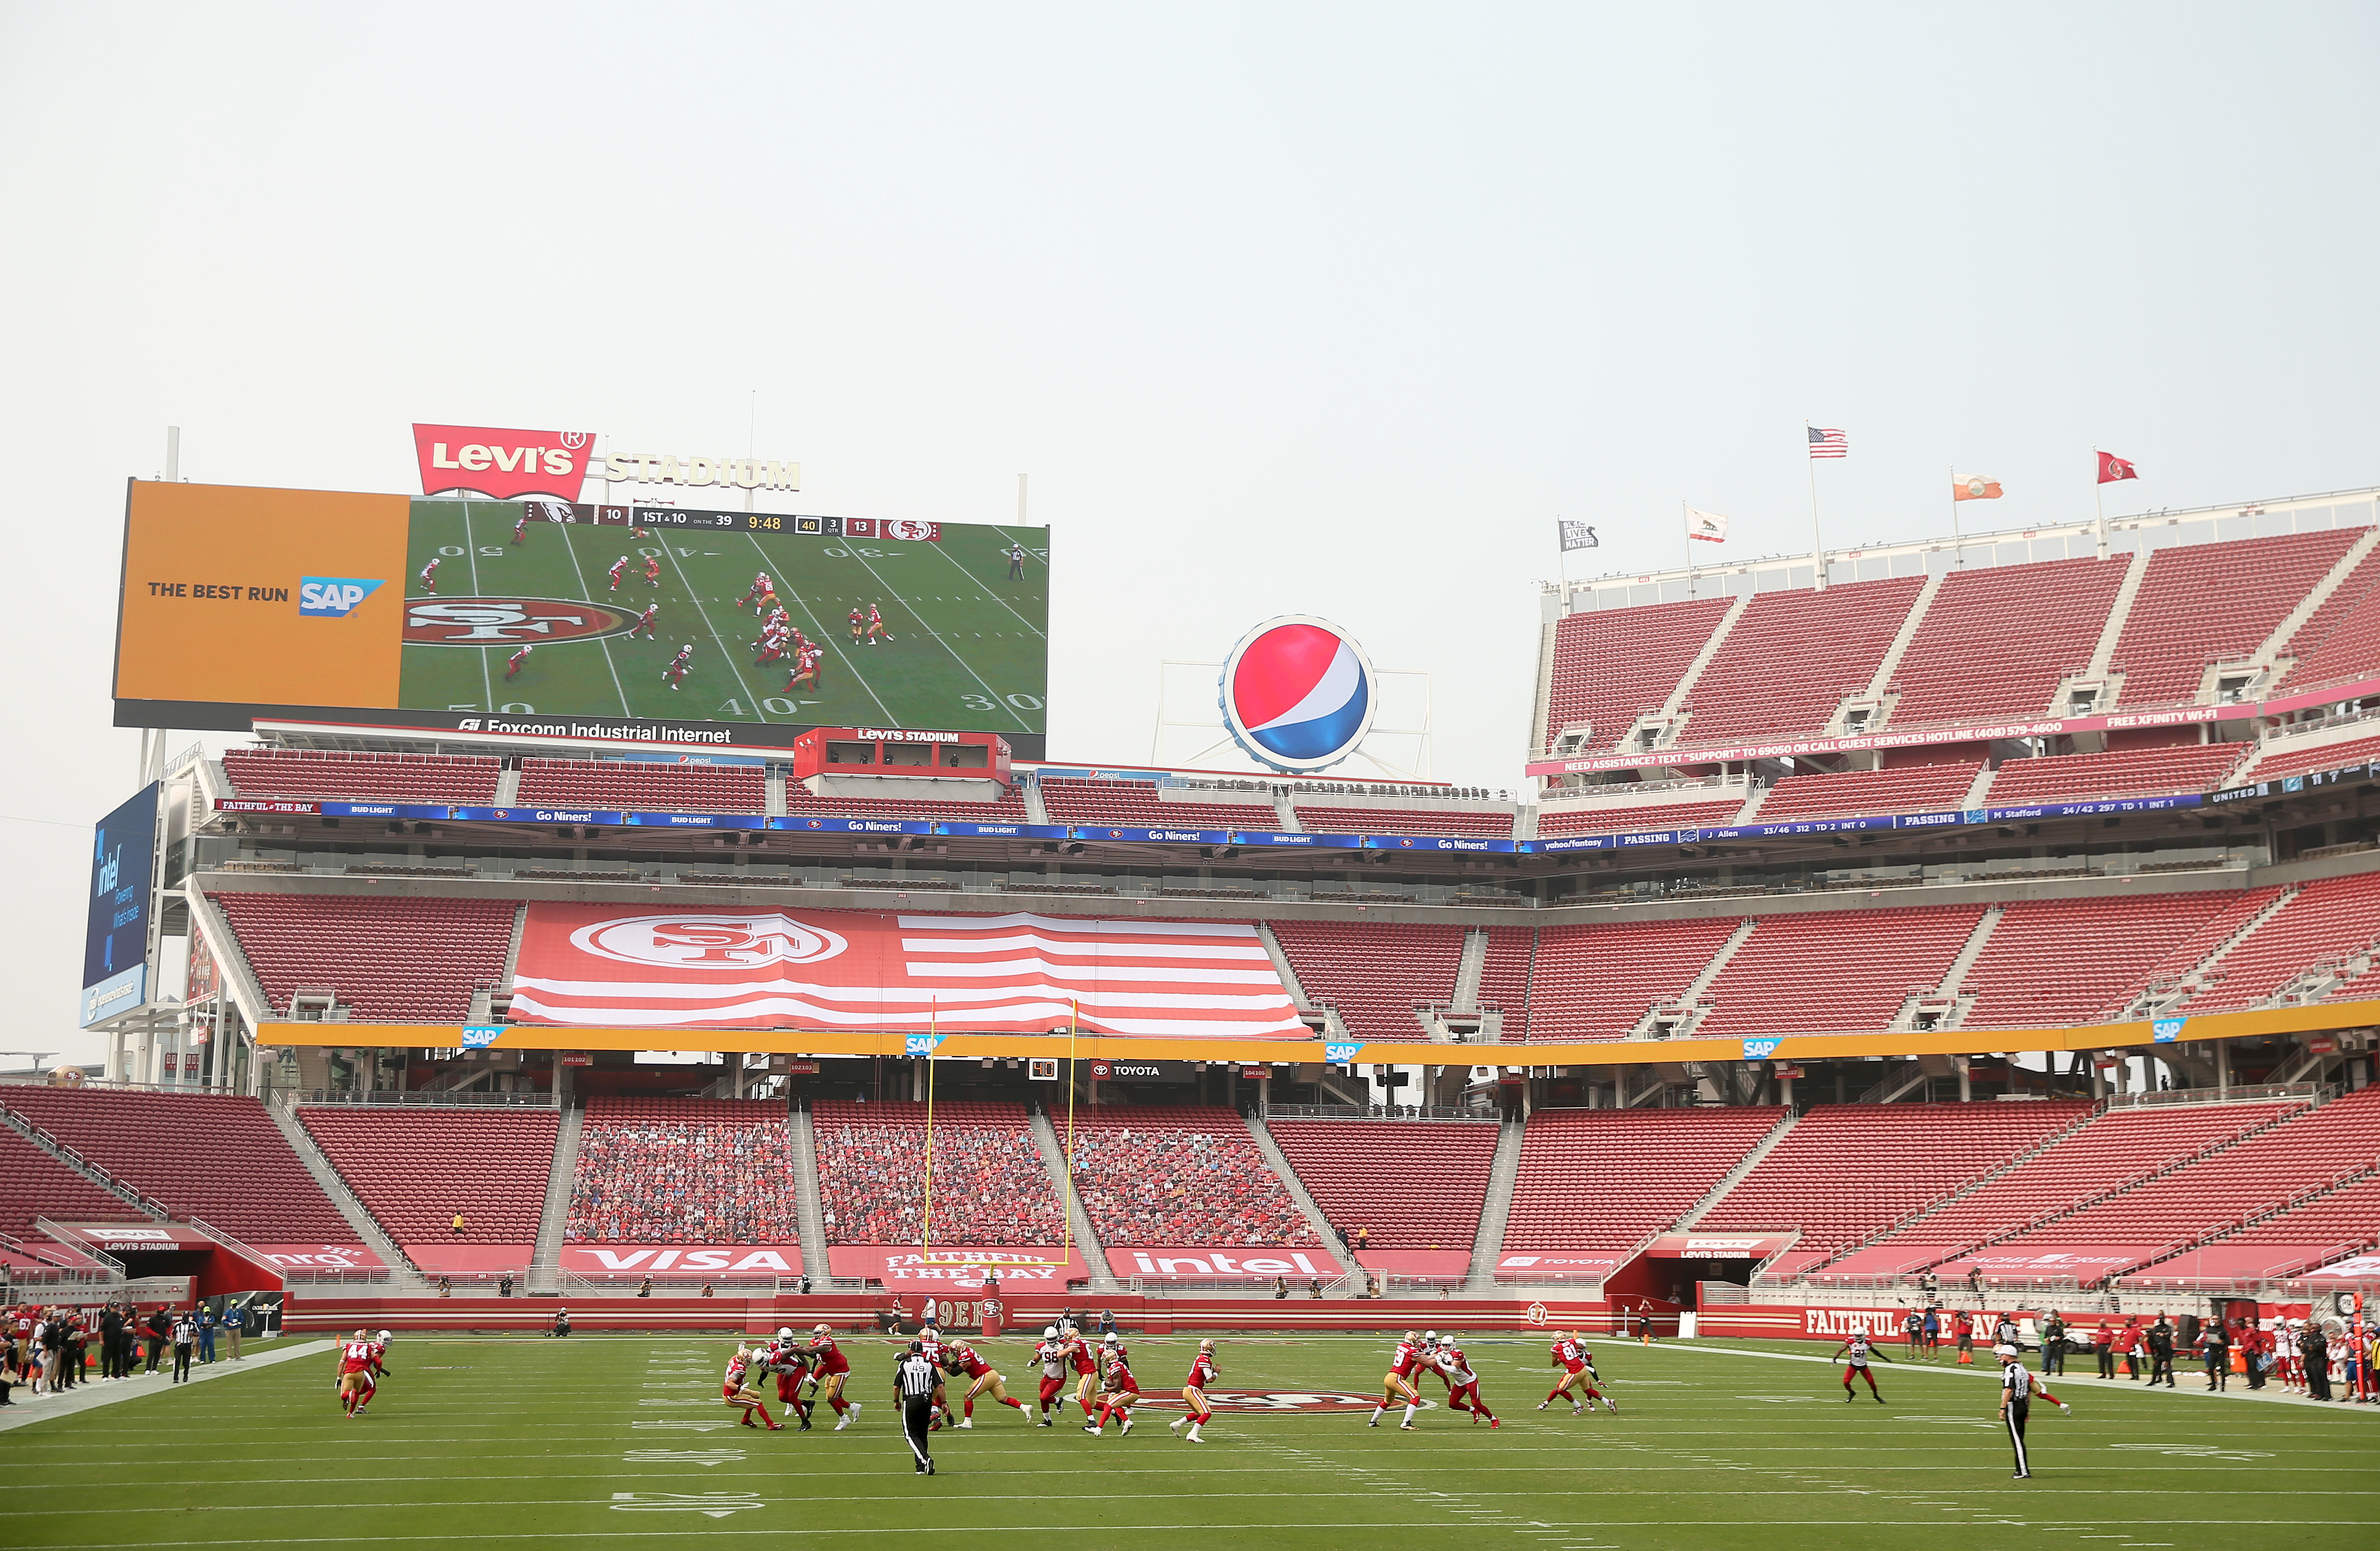 Cardinals-49ers live stream: How to watch Week 4 NFL game online